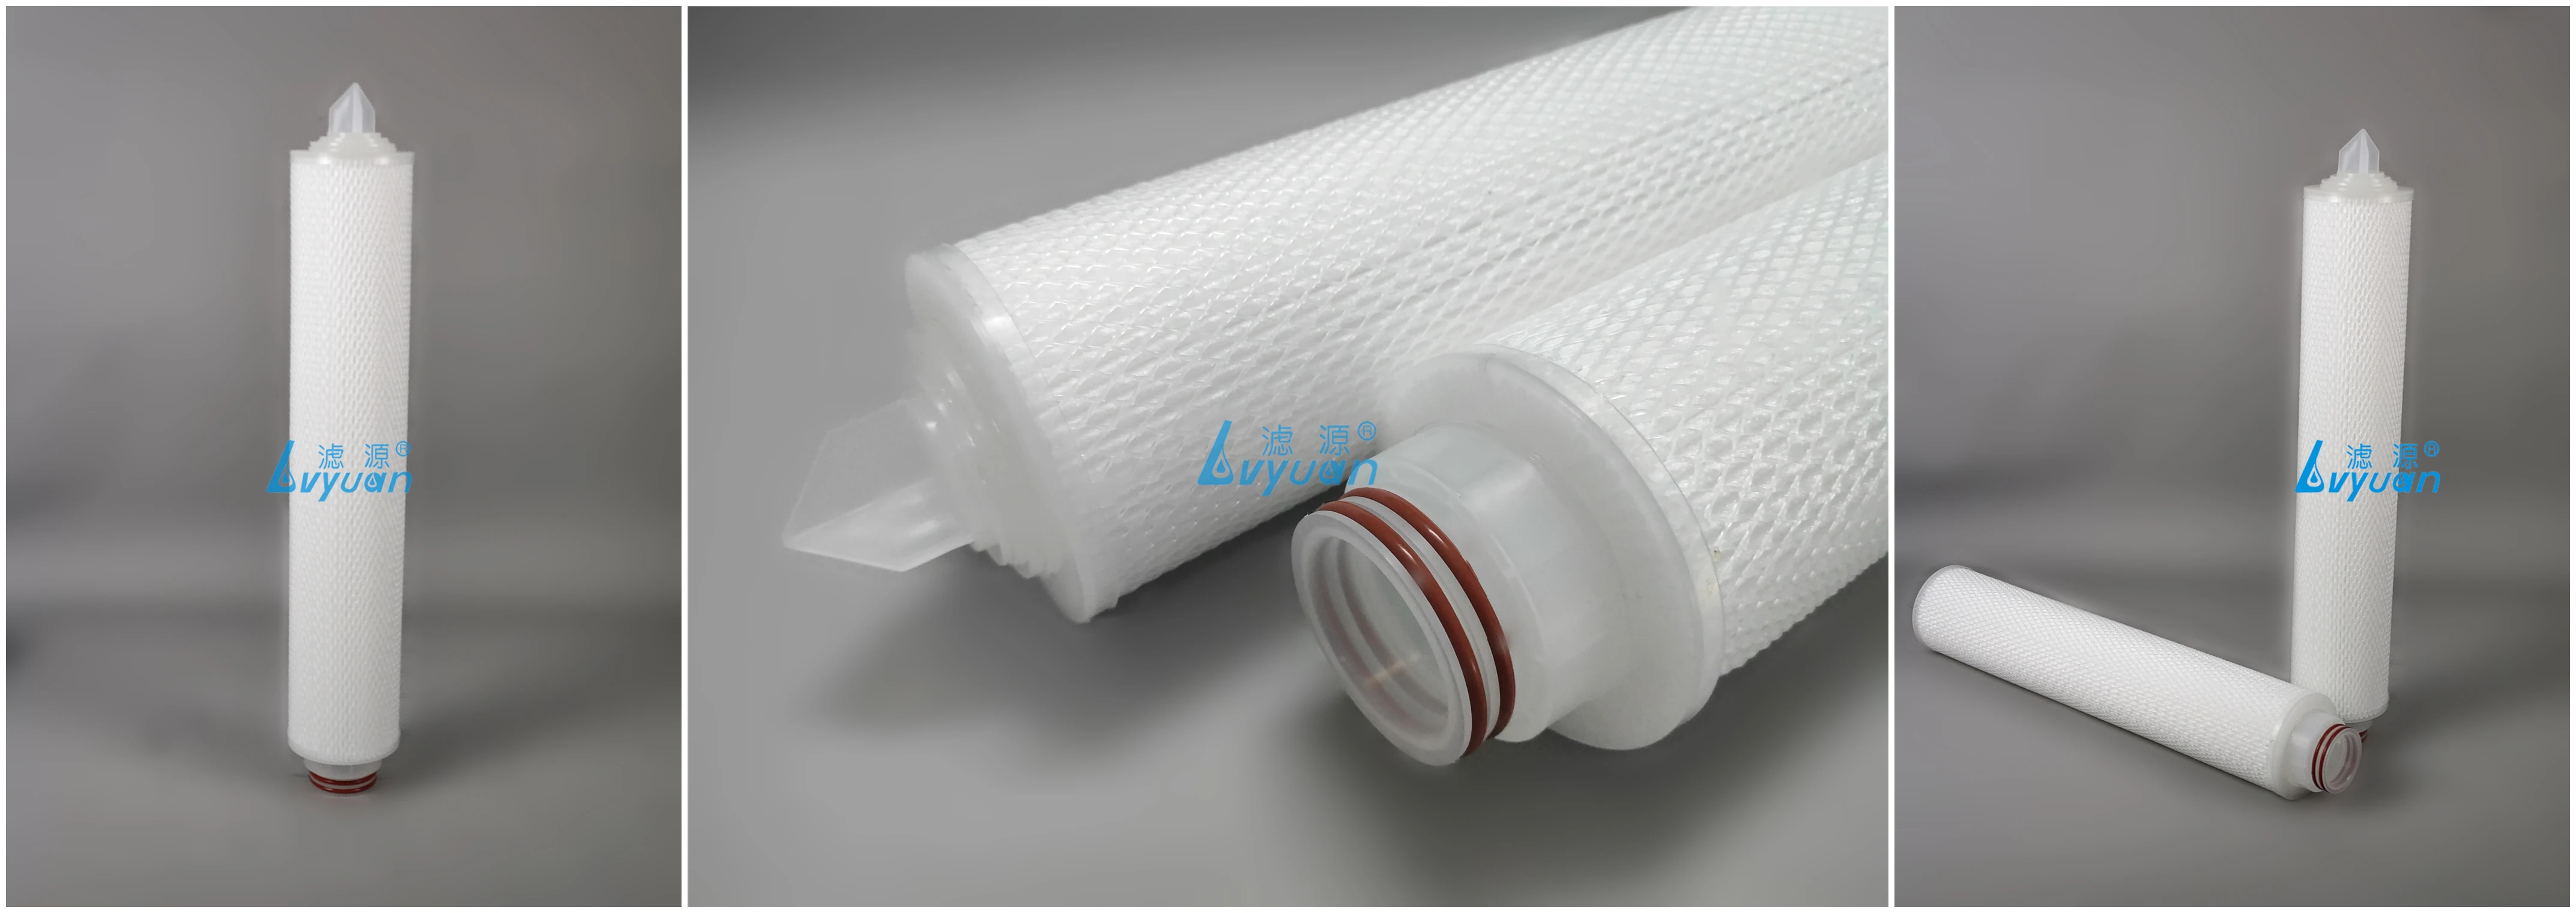 Lvyuan New pleated water filters exporter for industry-8